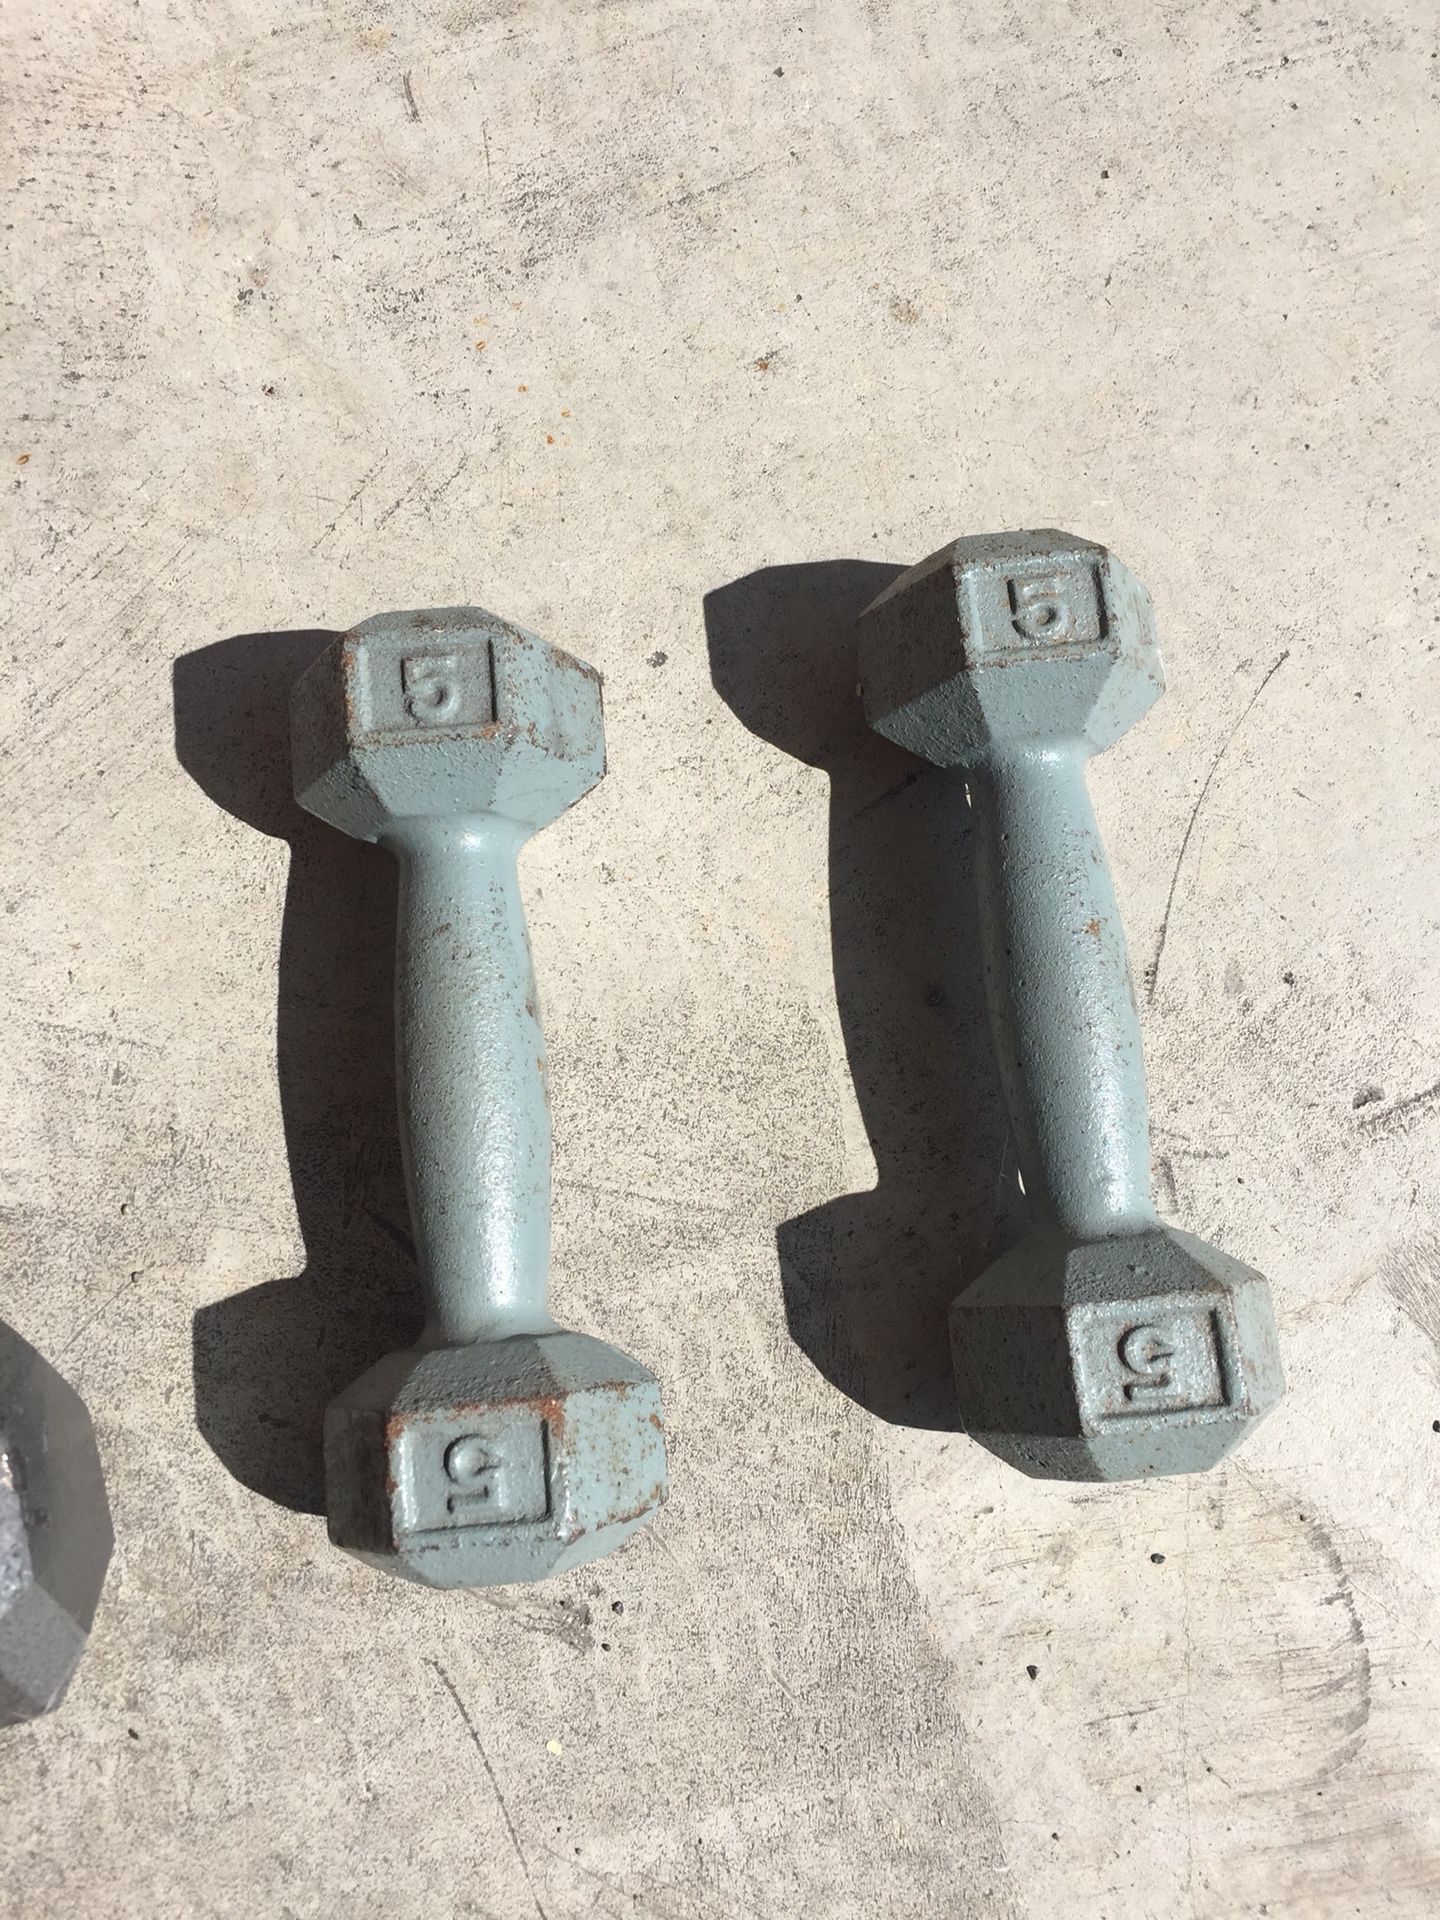 5 lb hand weights 5 pound dumbbells